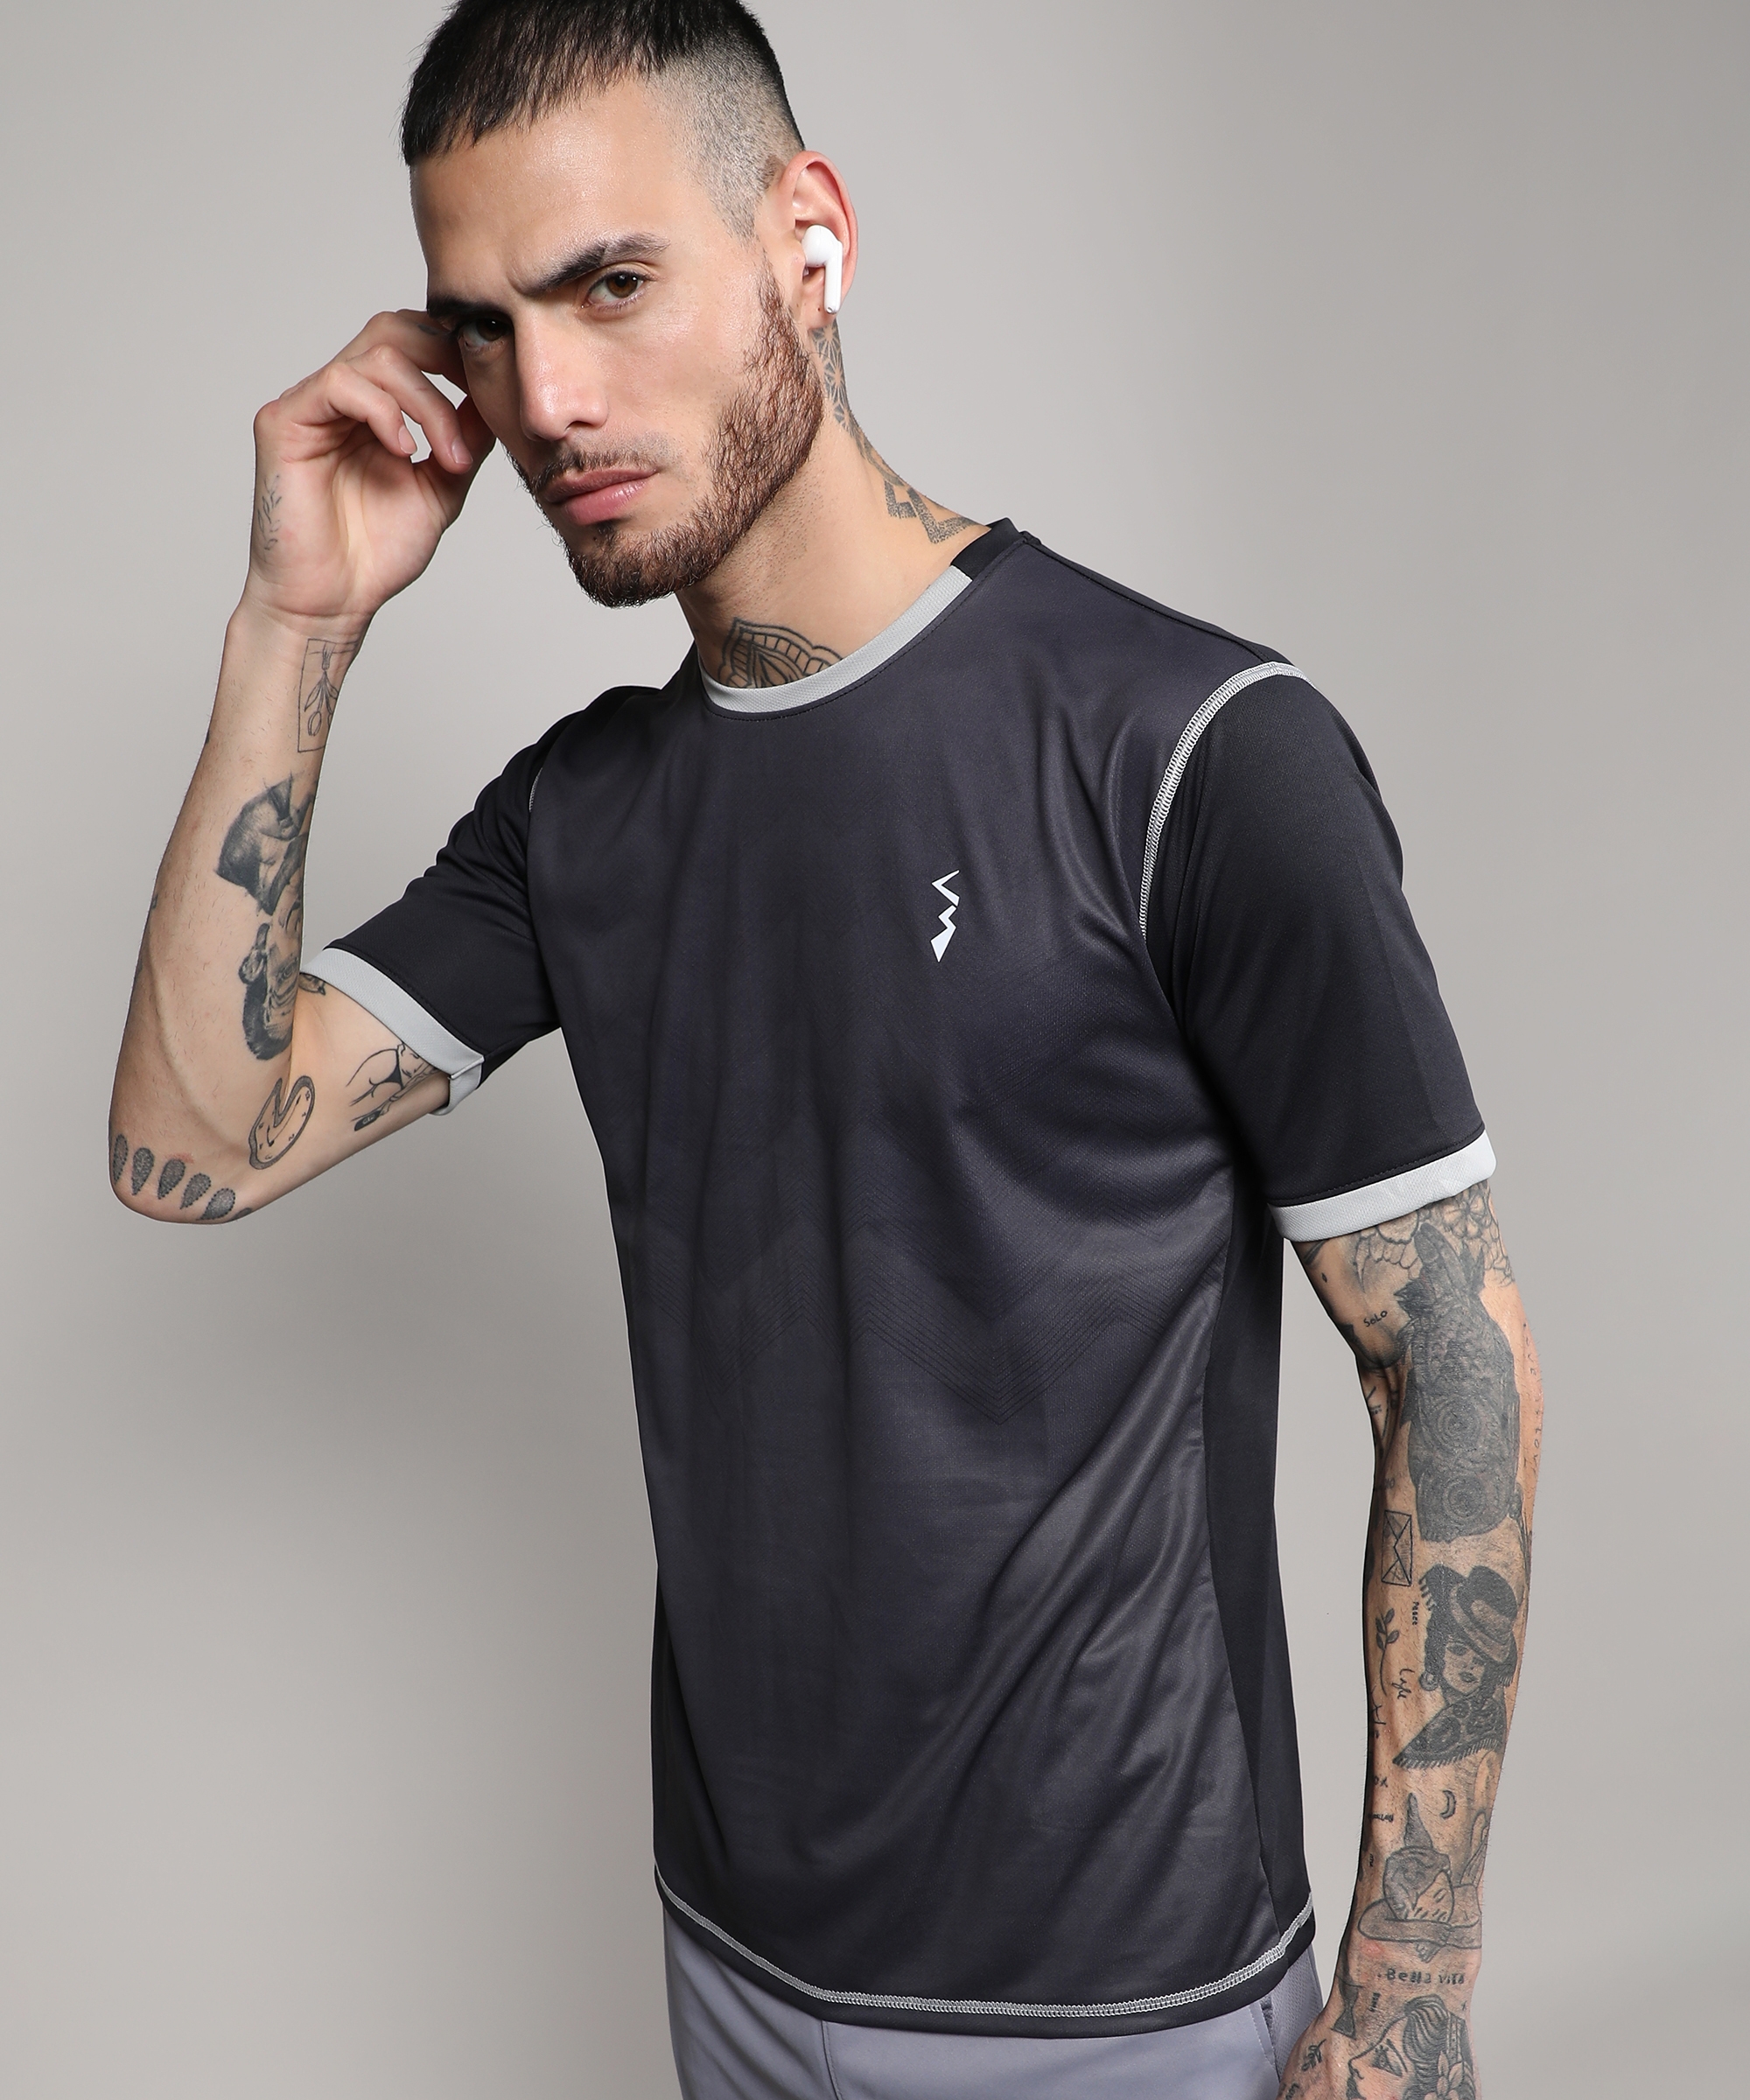 CAMPUS SUTRA | Men's Charcoal Grey Printed Activewear T-Shirt